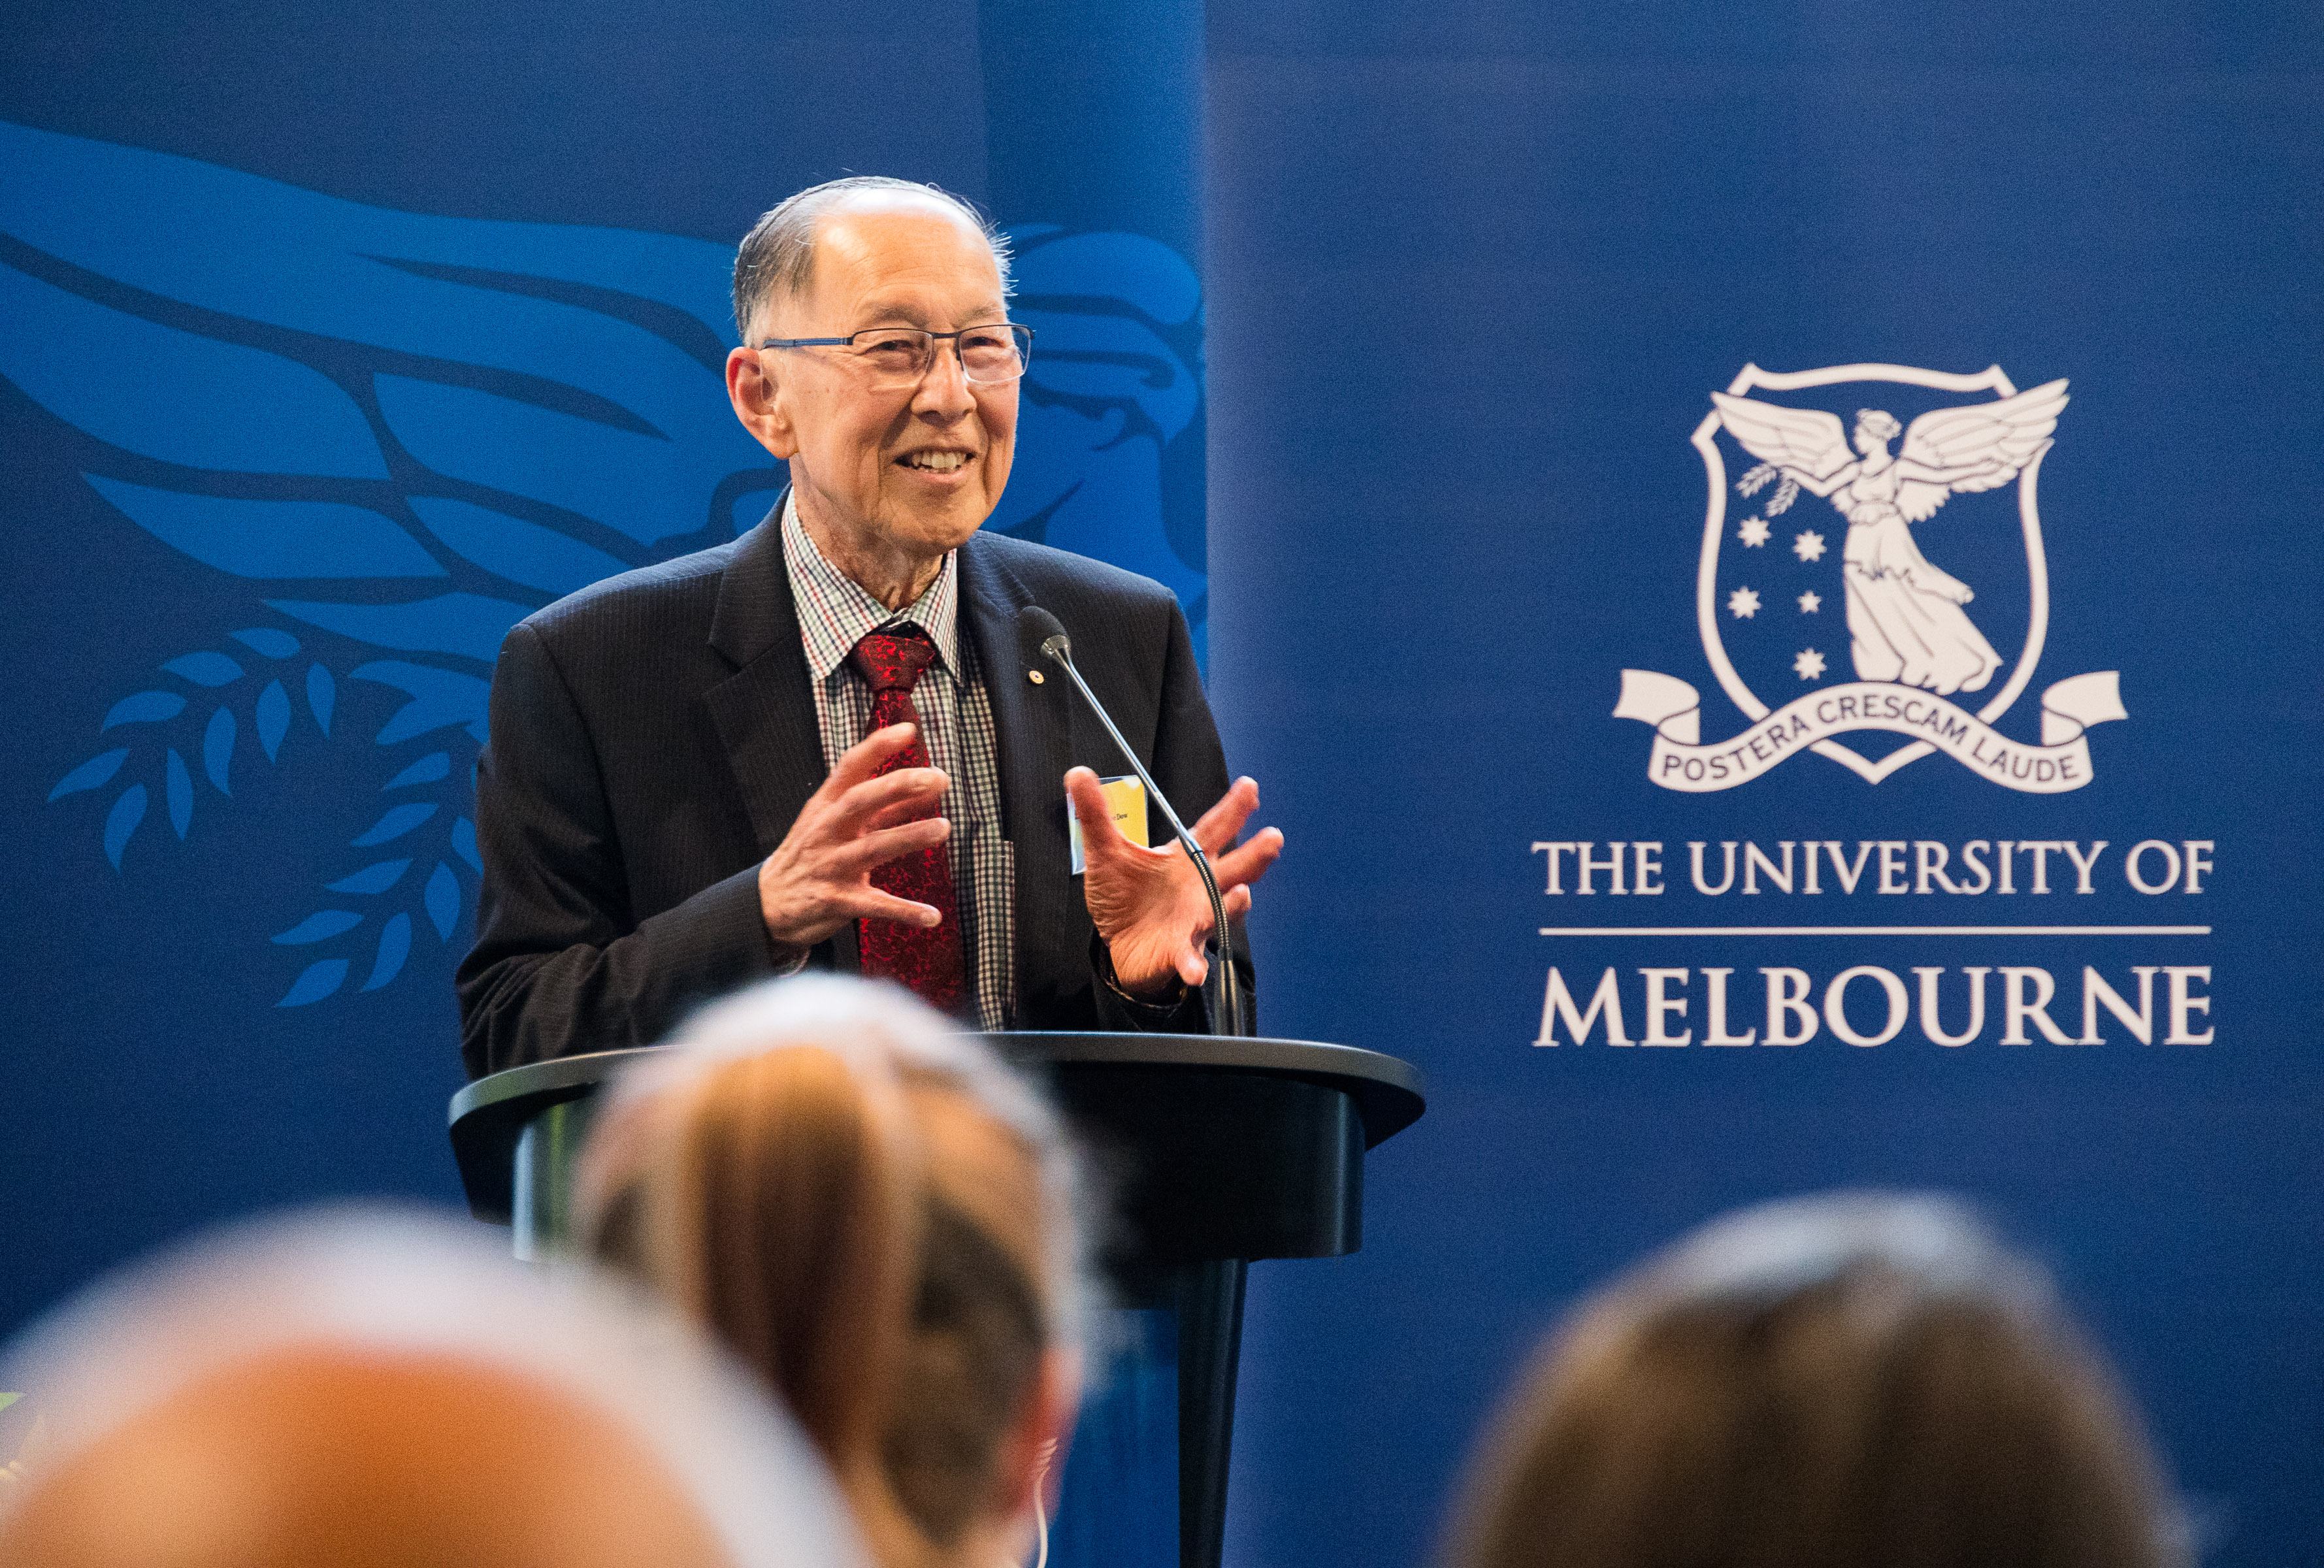 Emeritus Professor Kwong Le Dow sharing stories from his time as Dean from 1978 to 1998. Photo: Peter Casemento.